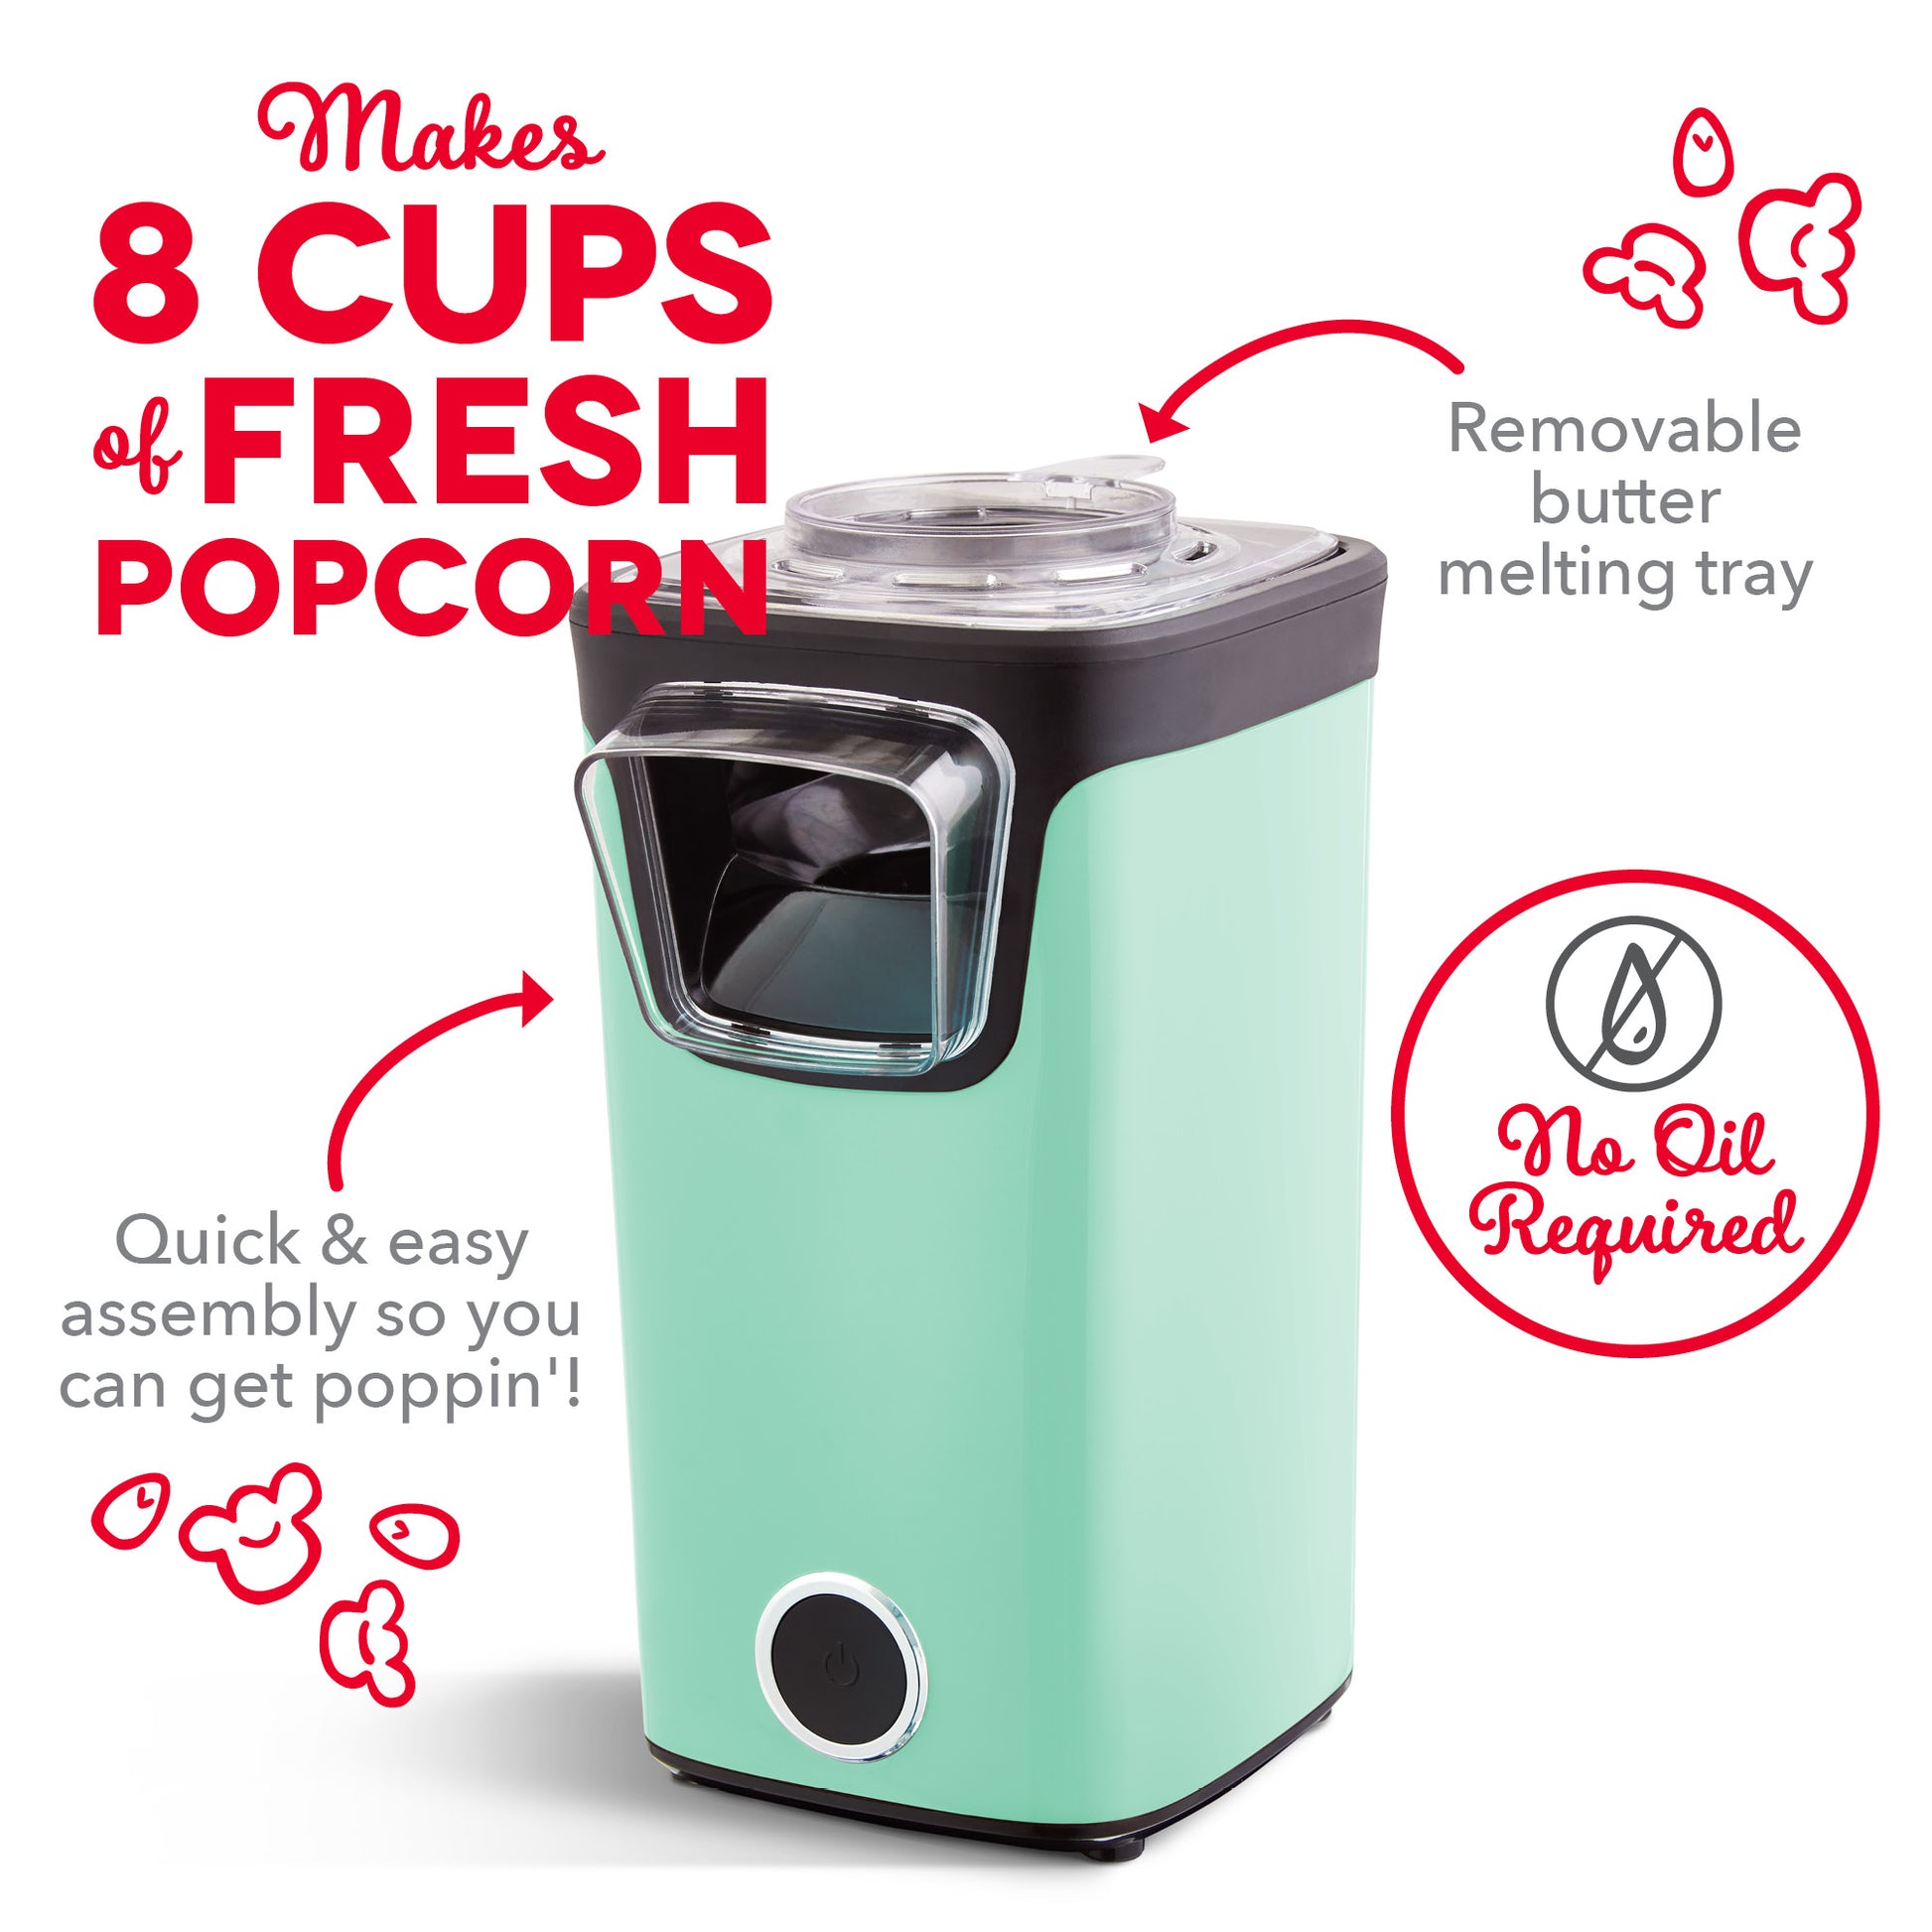 Dash Turbo Pop Popcorn Maker Unboxing and Review (No Oil/Hot Air Popcorn  Machine) 